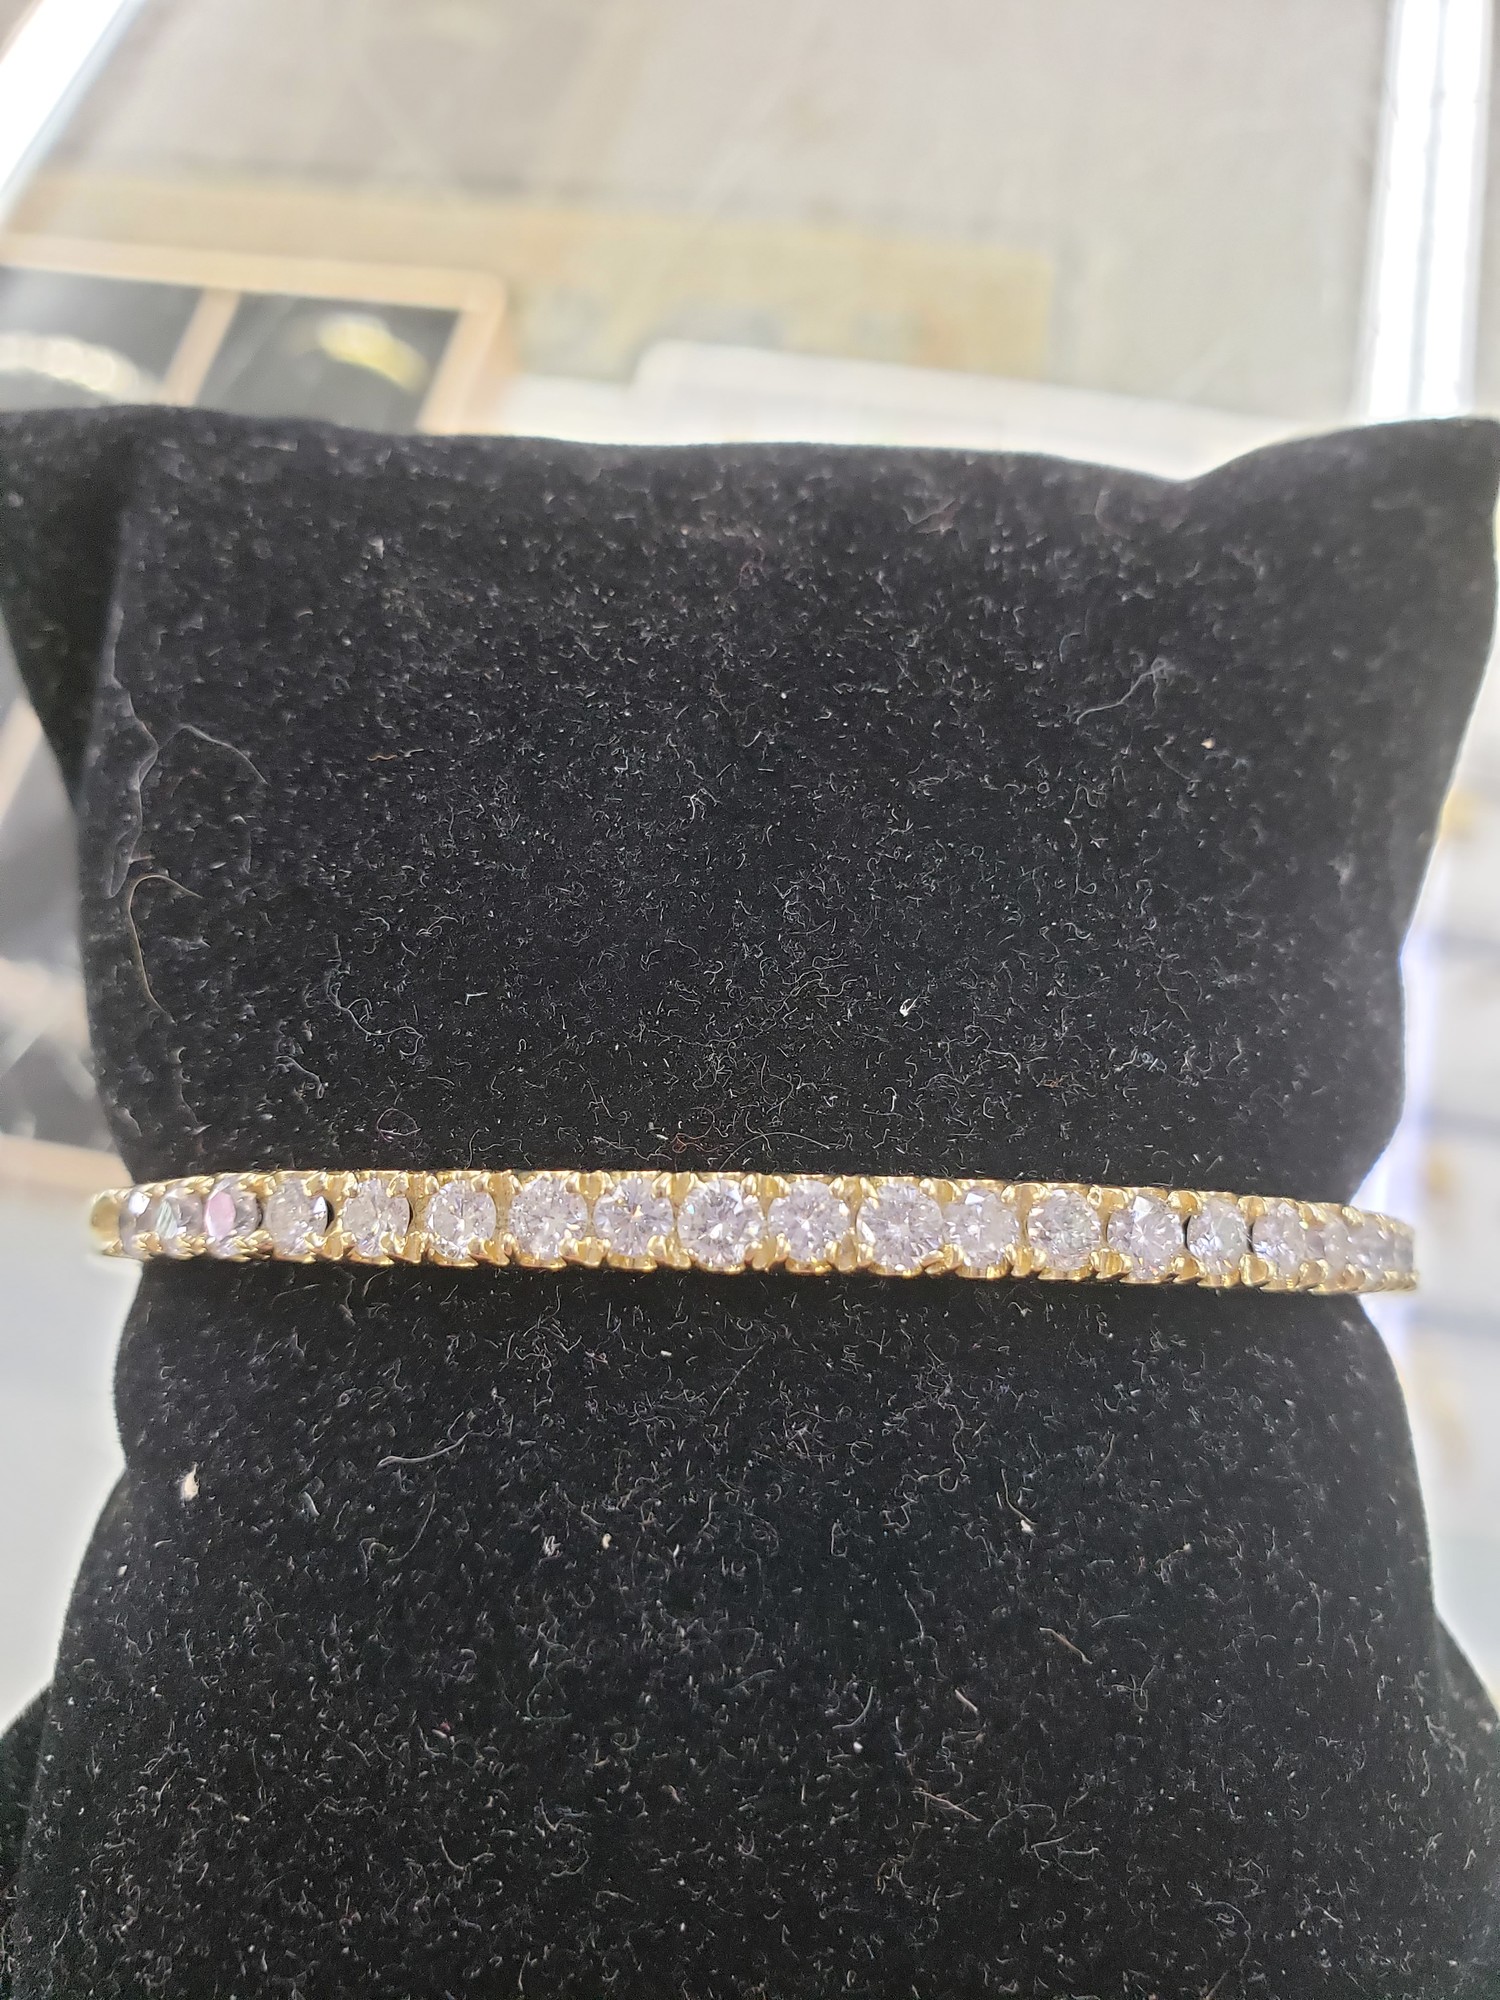 Diamond Bangle Bracelet
2ct total weight set in 14k yellow gold
H-I color SI1-2 Clarity

Pictures do not do the jewelry justice.
Photo ID required for pick up of online purchases. We will not ship jewelry purchases.

All jewelry has been checked by a Certified Gemological Institute of America (GIA) Accredited Jewelry Professional (AJP) and/or appraised by a certified local jeweler.